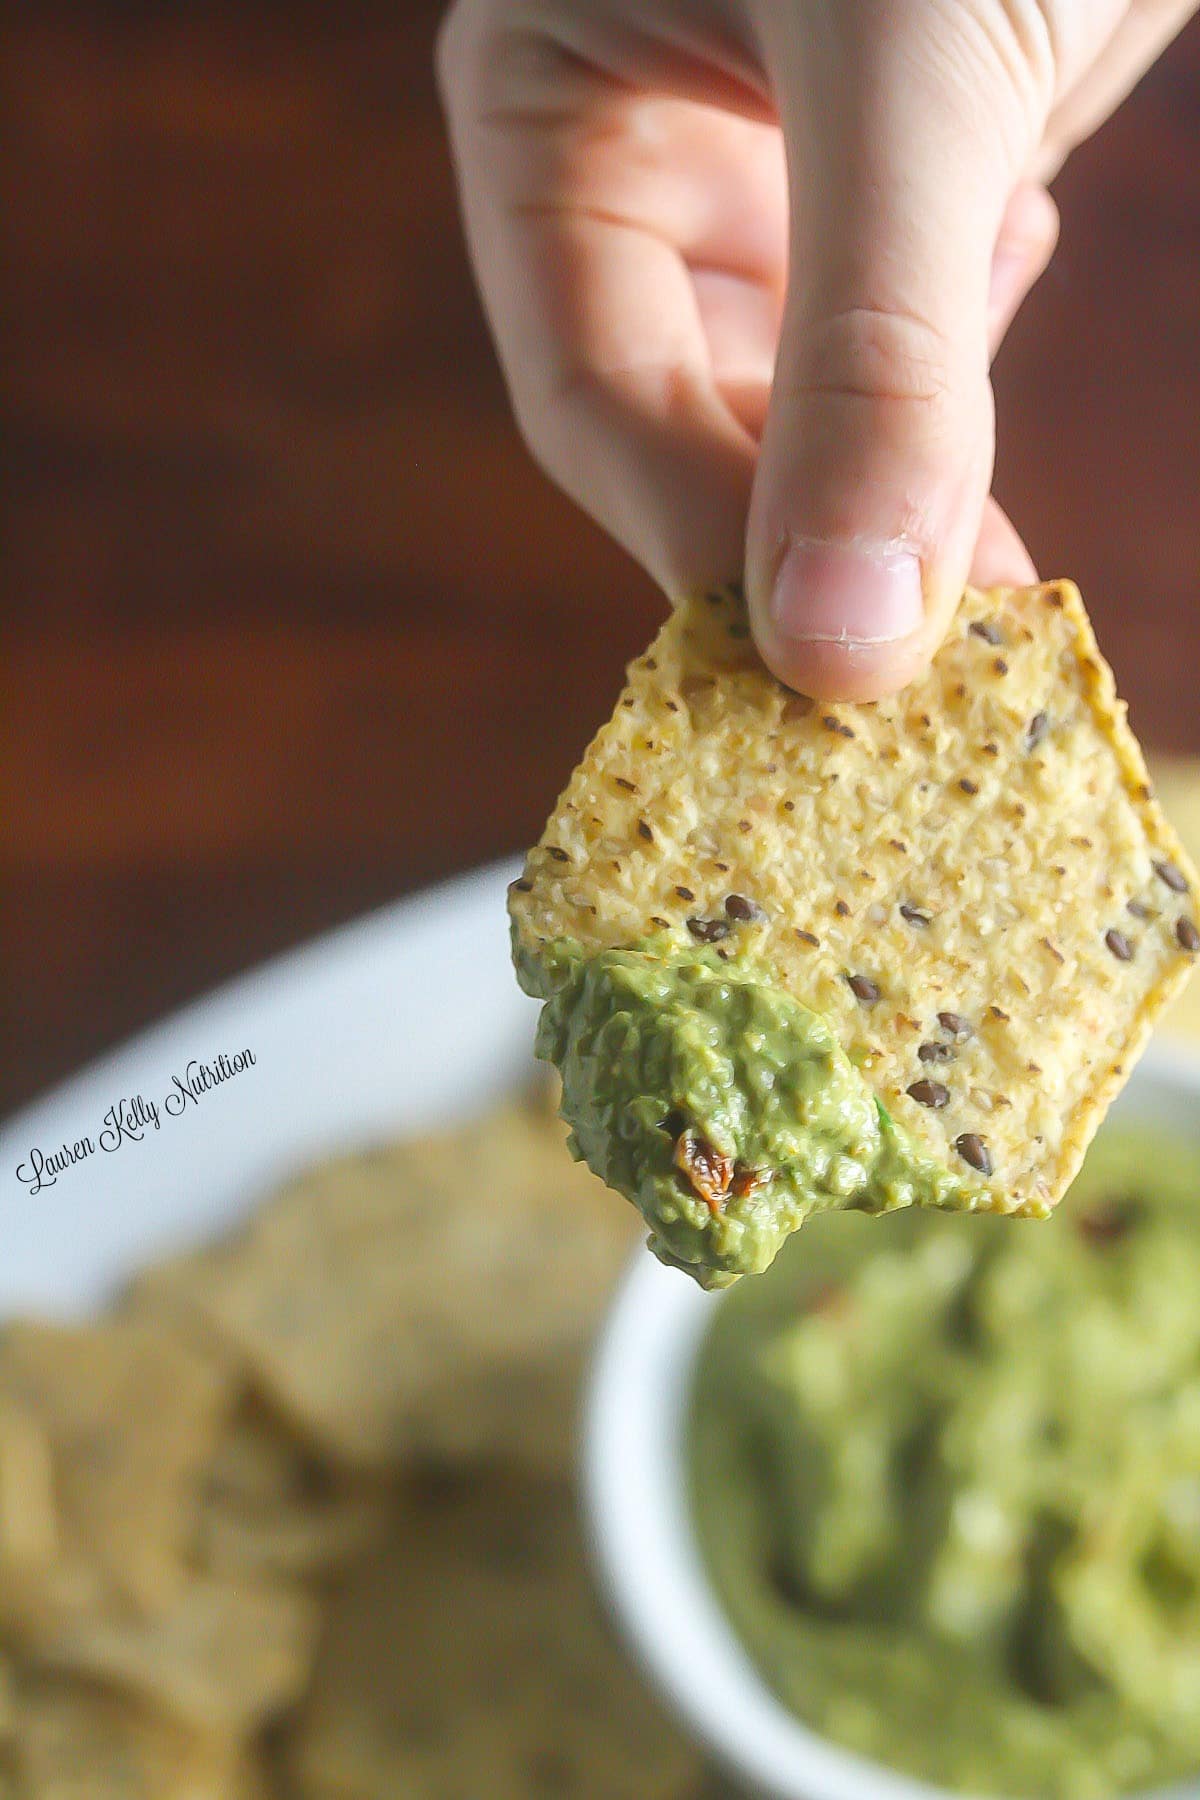 Spinach Dun Dried Tomato Greek Yogurt Dip is only 20 calories per serving!